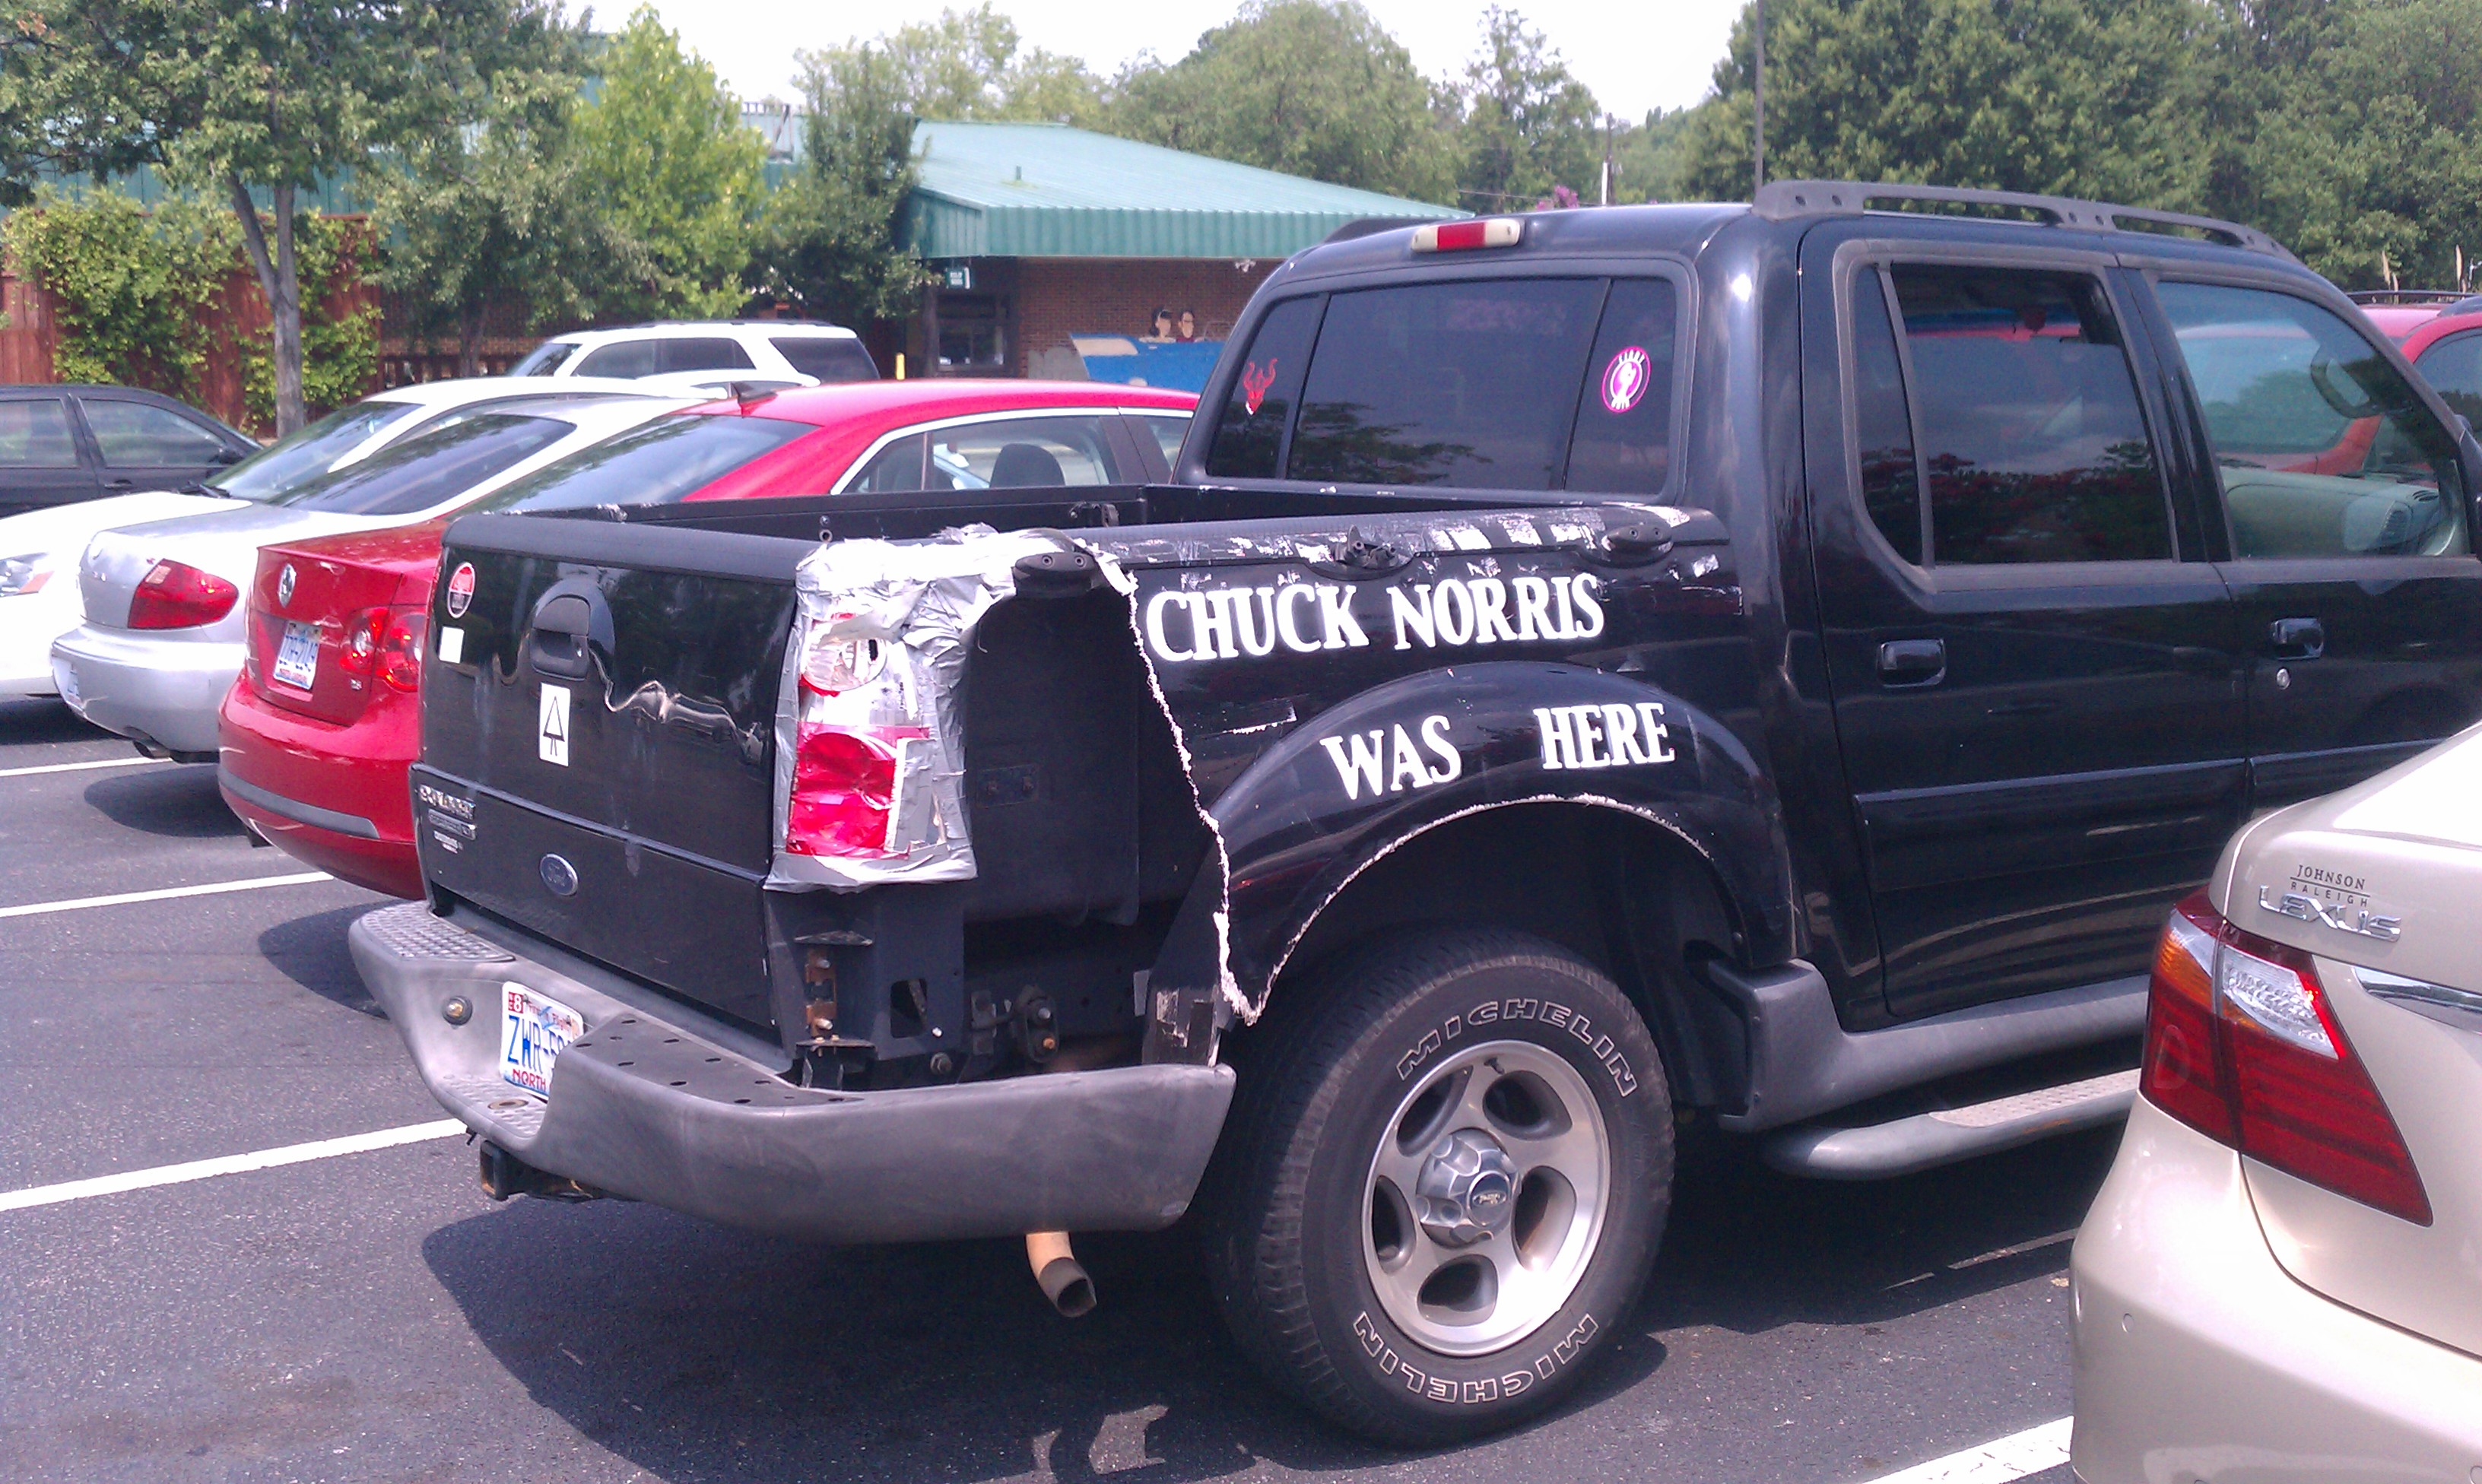 Chuck Norris Was Here! I feel so safe now.